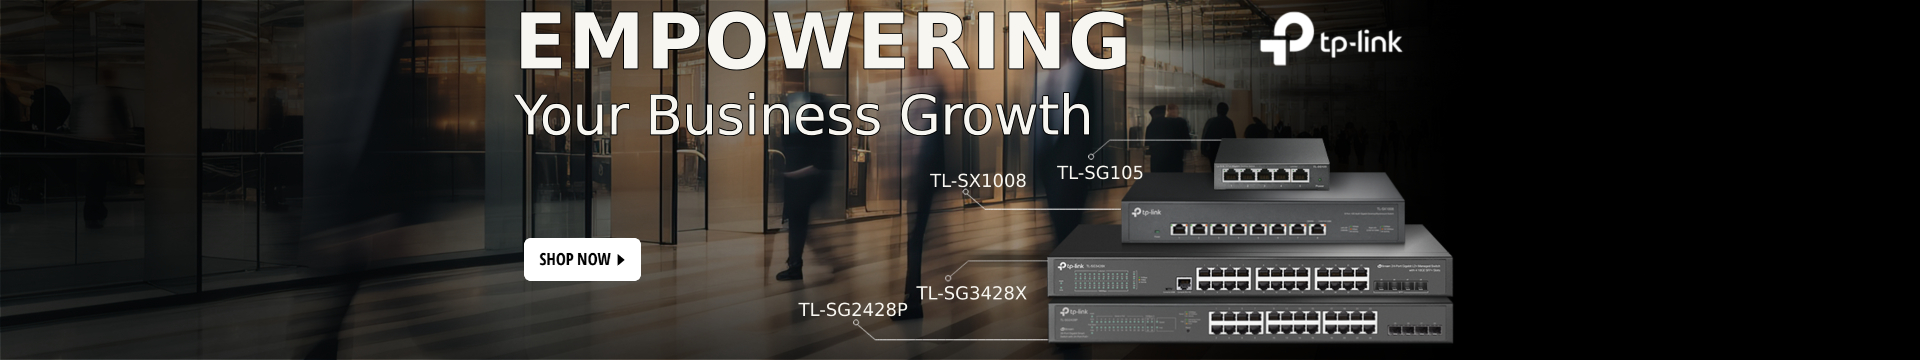 Empowering your business growth